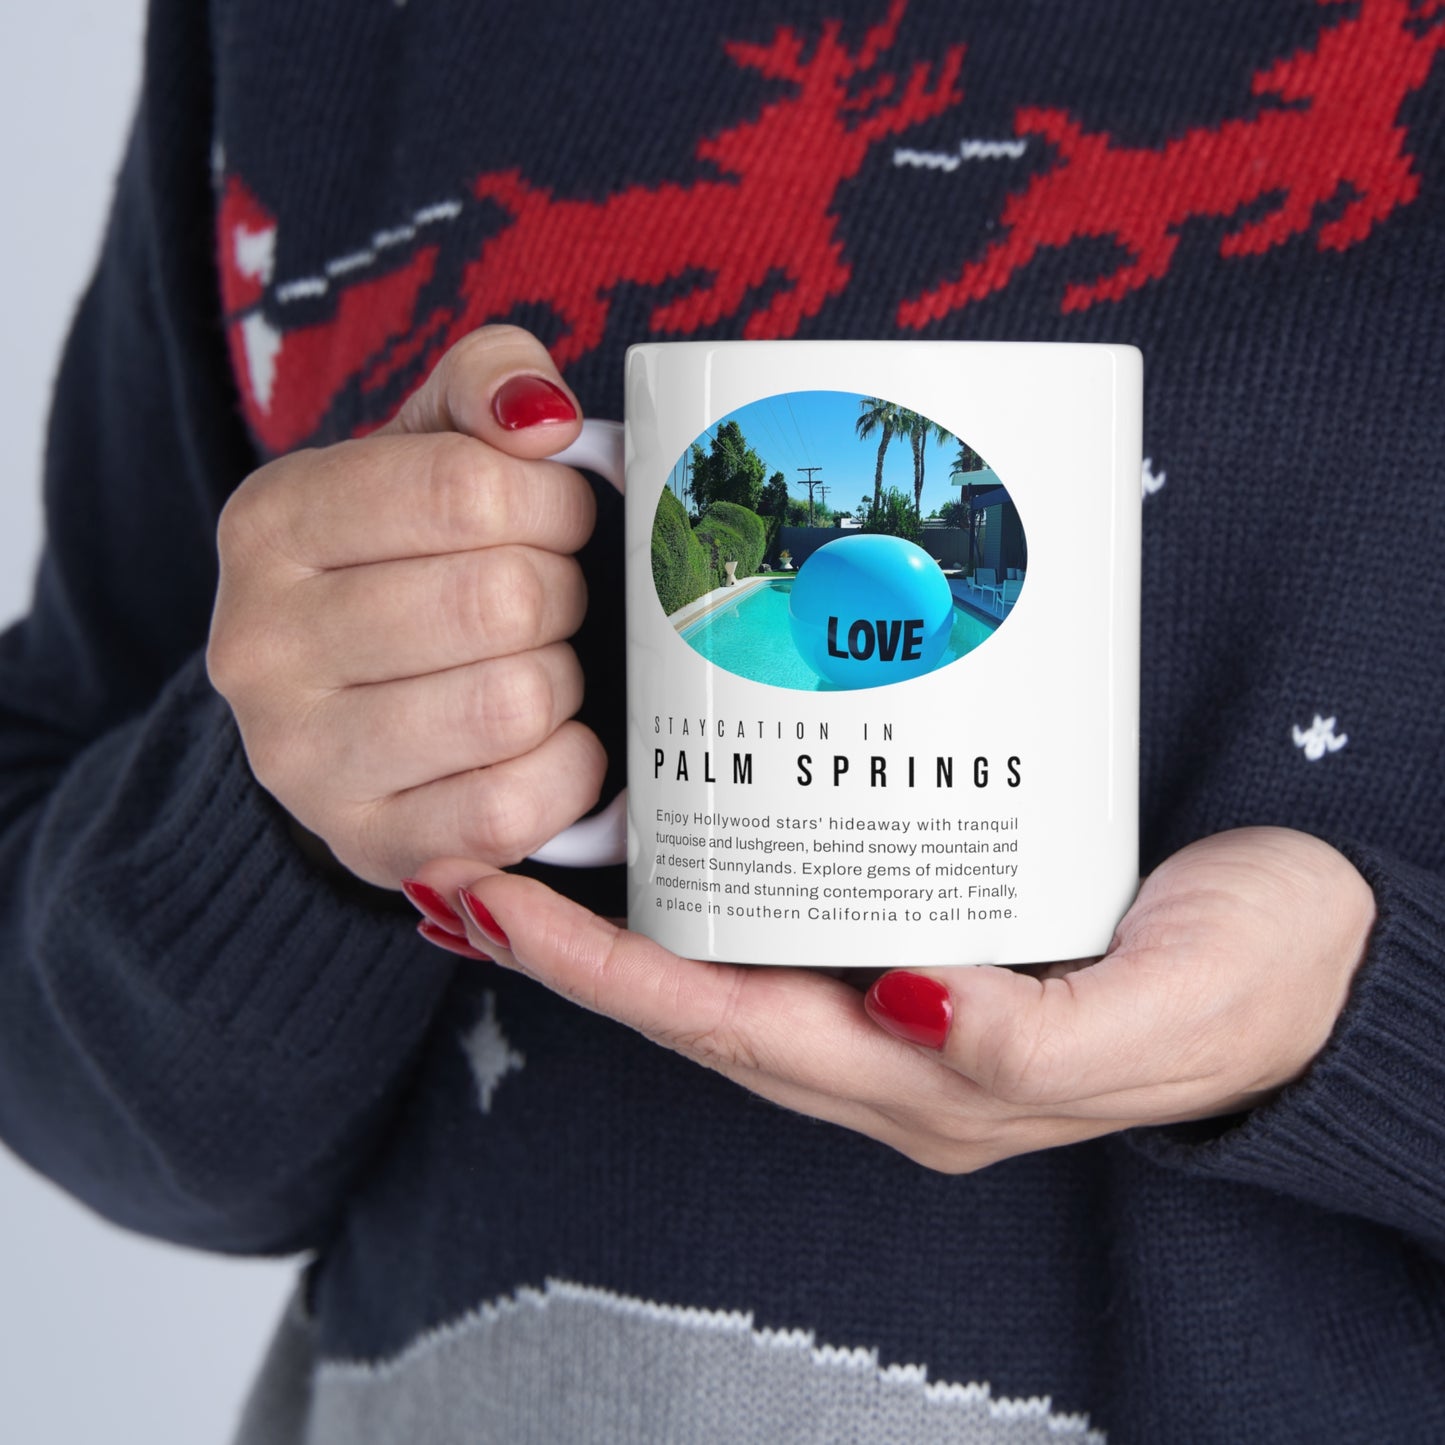 Staycation in Palm Springs  Lifestyle Coffee Mug by ViralDestinations